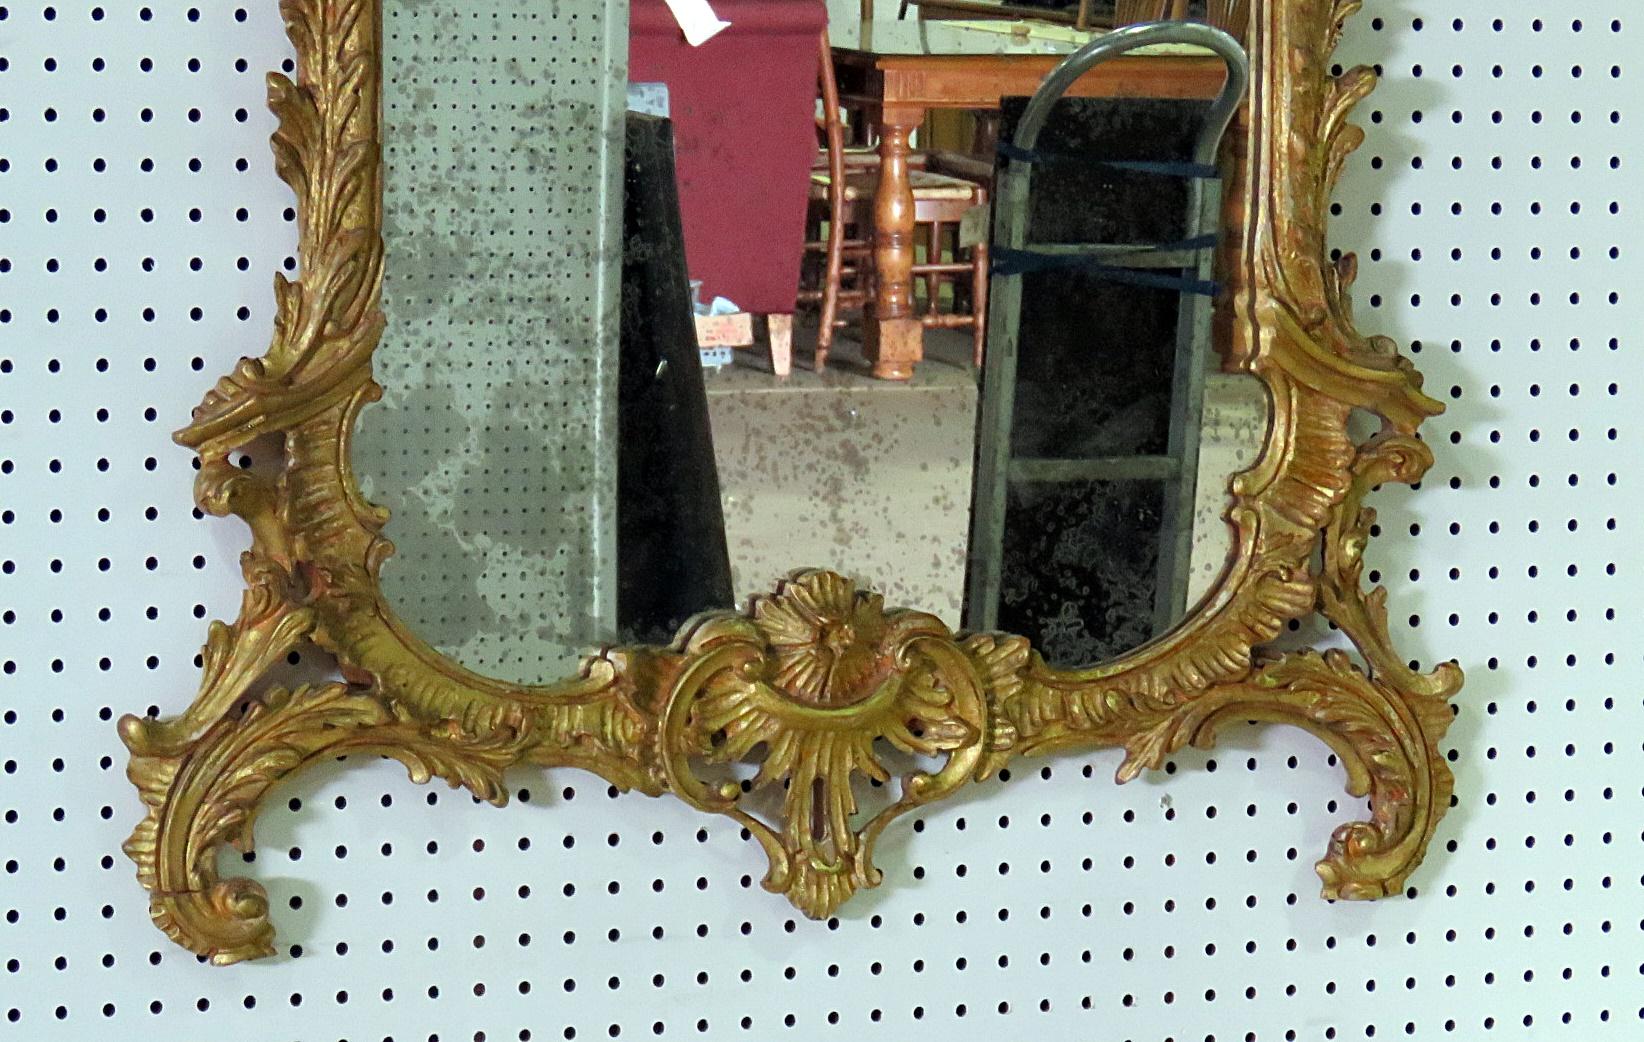 Regency style wall mirror with a distressed finish.